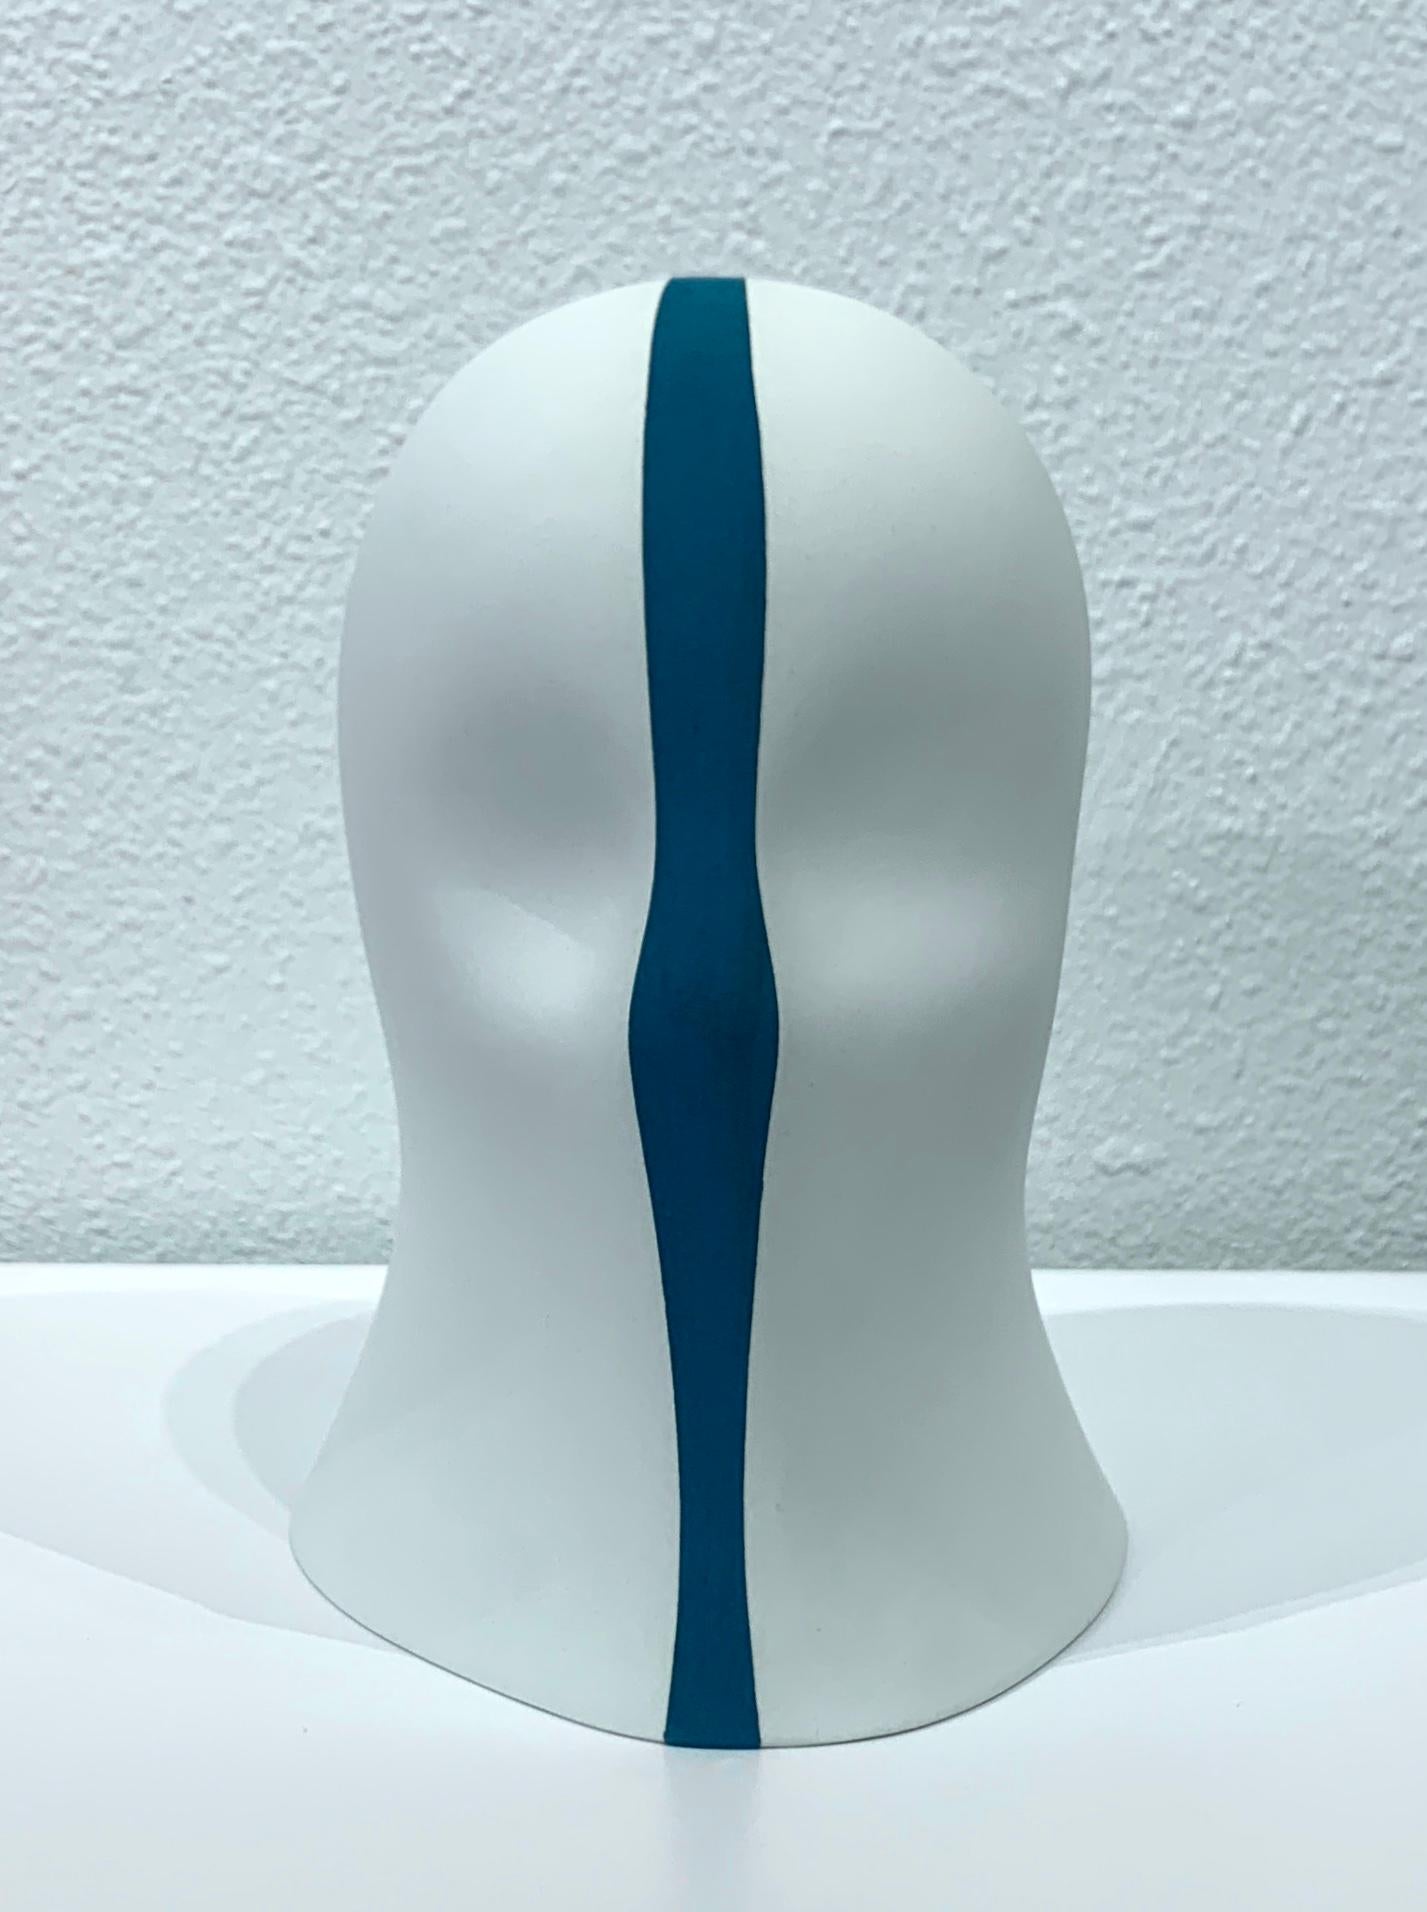 Teal Division Veil, Chloe Rizzo Sculpture Porcelain Female Head White

A porcelain and glaze sculpture by artist Chloe Rizzo.  Her 